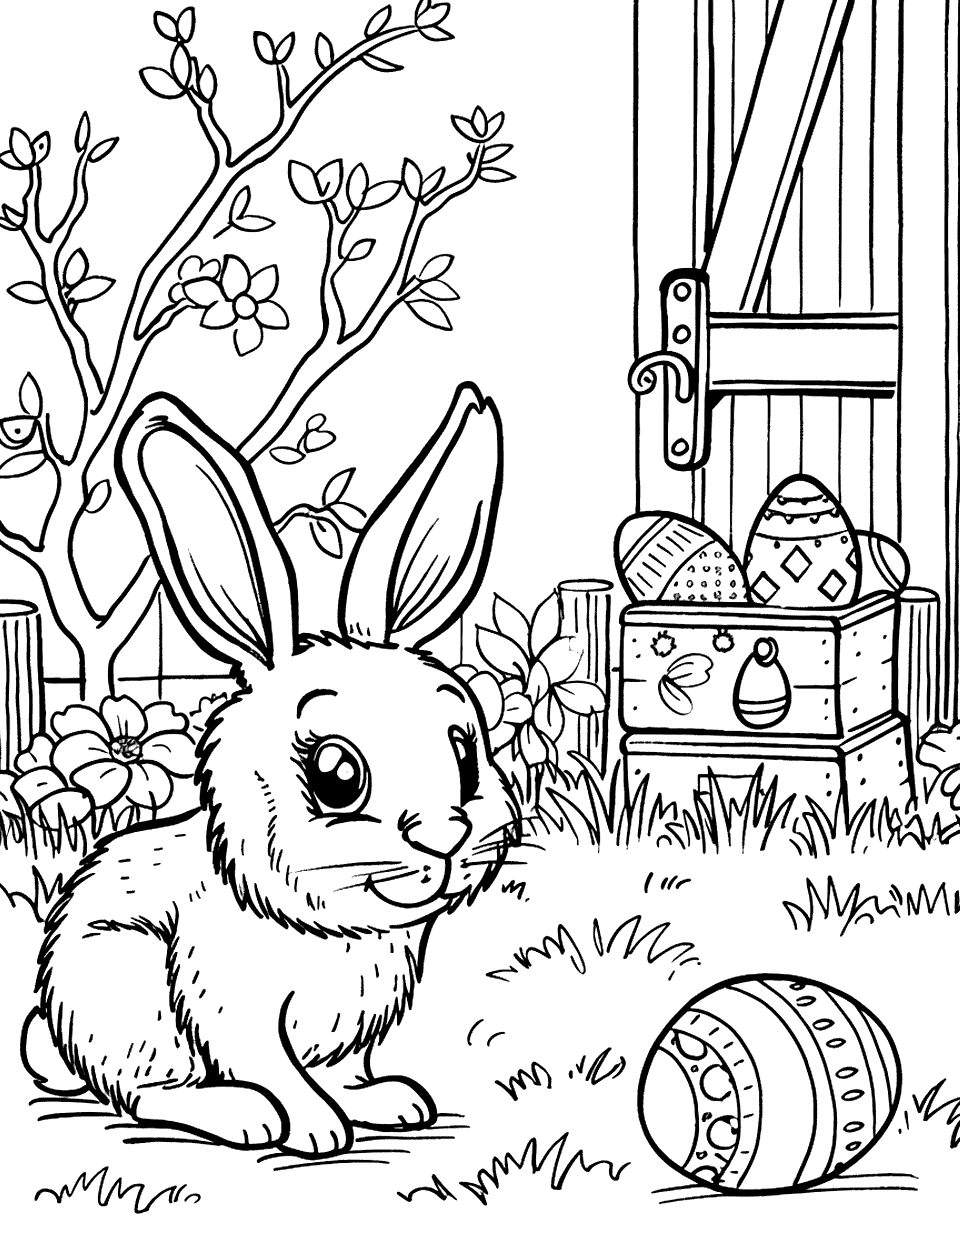 Egg Hunt Adventure Easter Bunny Coloring Page - A scene where a bunny is searching for Easter eggs hidden in a simple backyard setting.